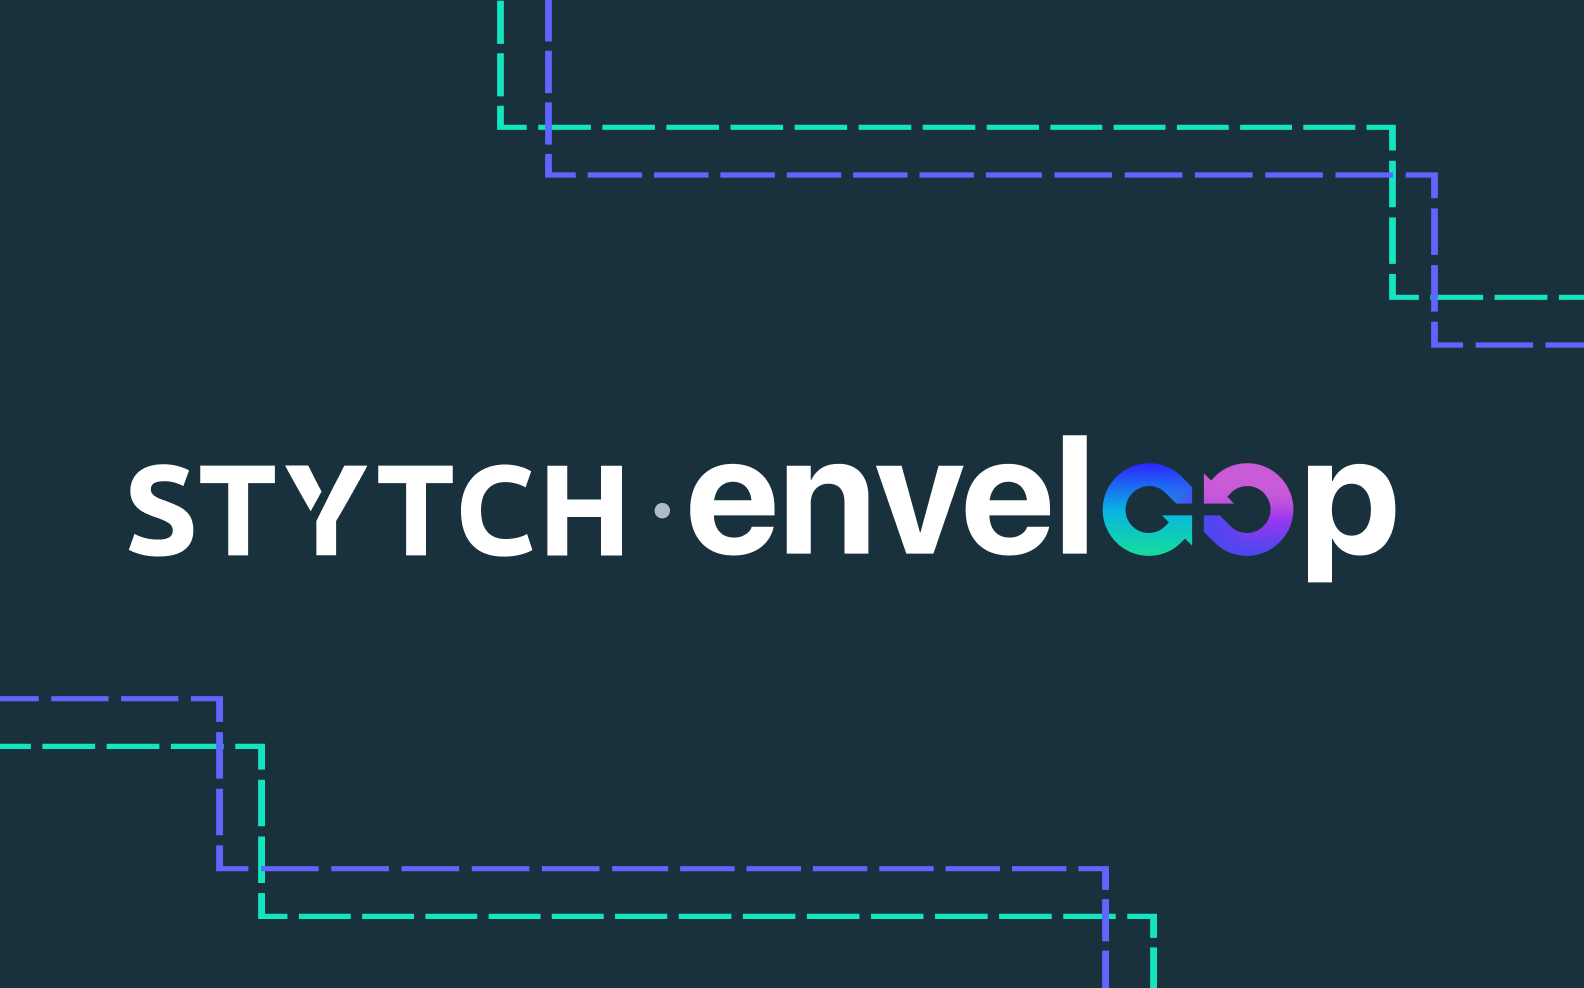 The two logos for Stytch and Enveloop, side by side